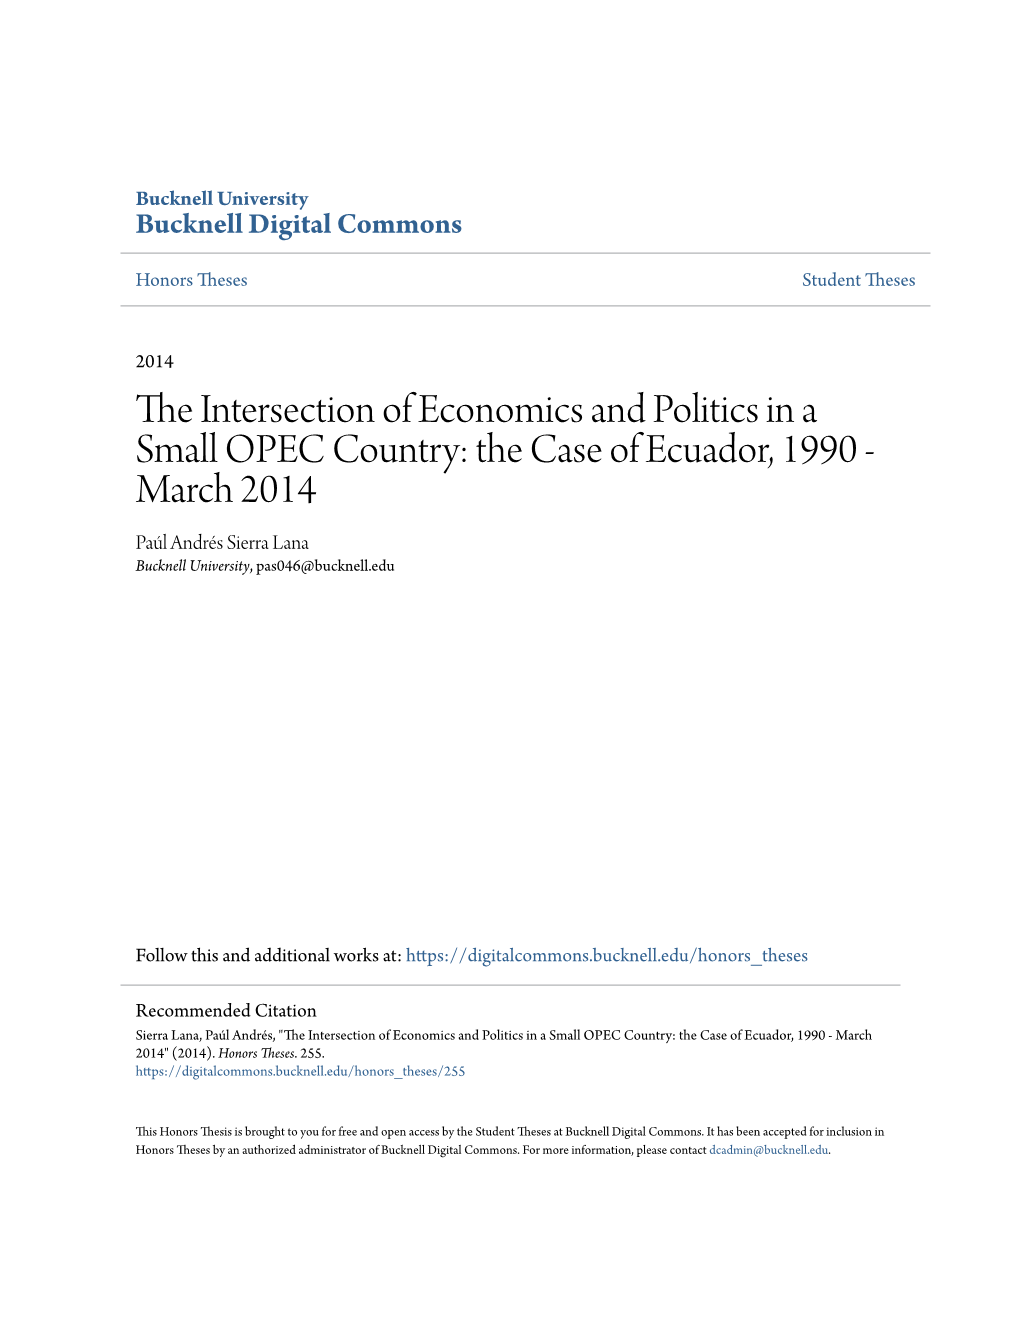 THE INTERSECTION of ECONOMICS and POLITICS in a SMALL OPEC COUNTRY: the CASE of ECUADOR, 1990 - March 2014